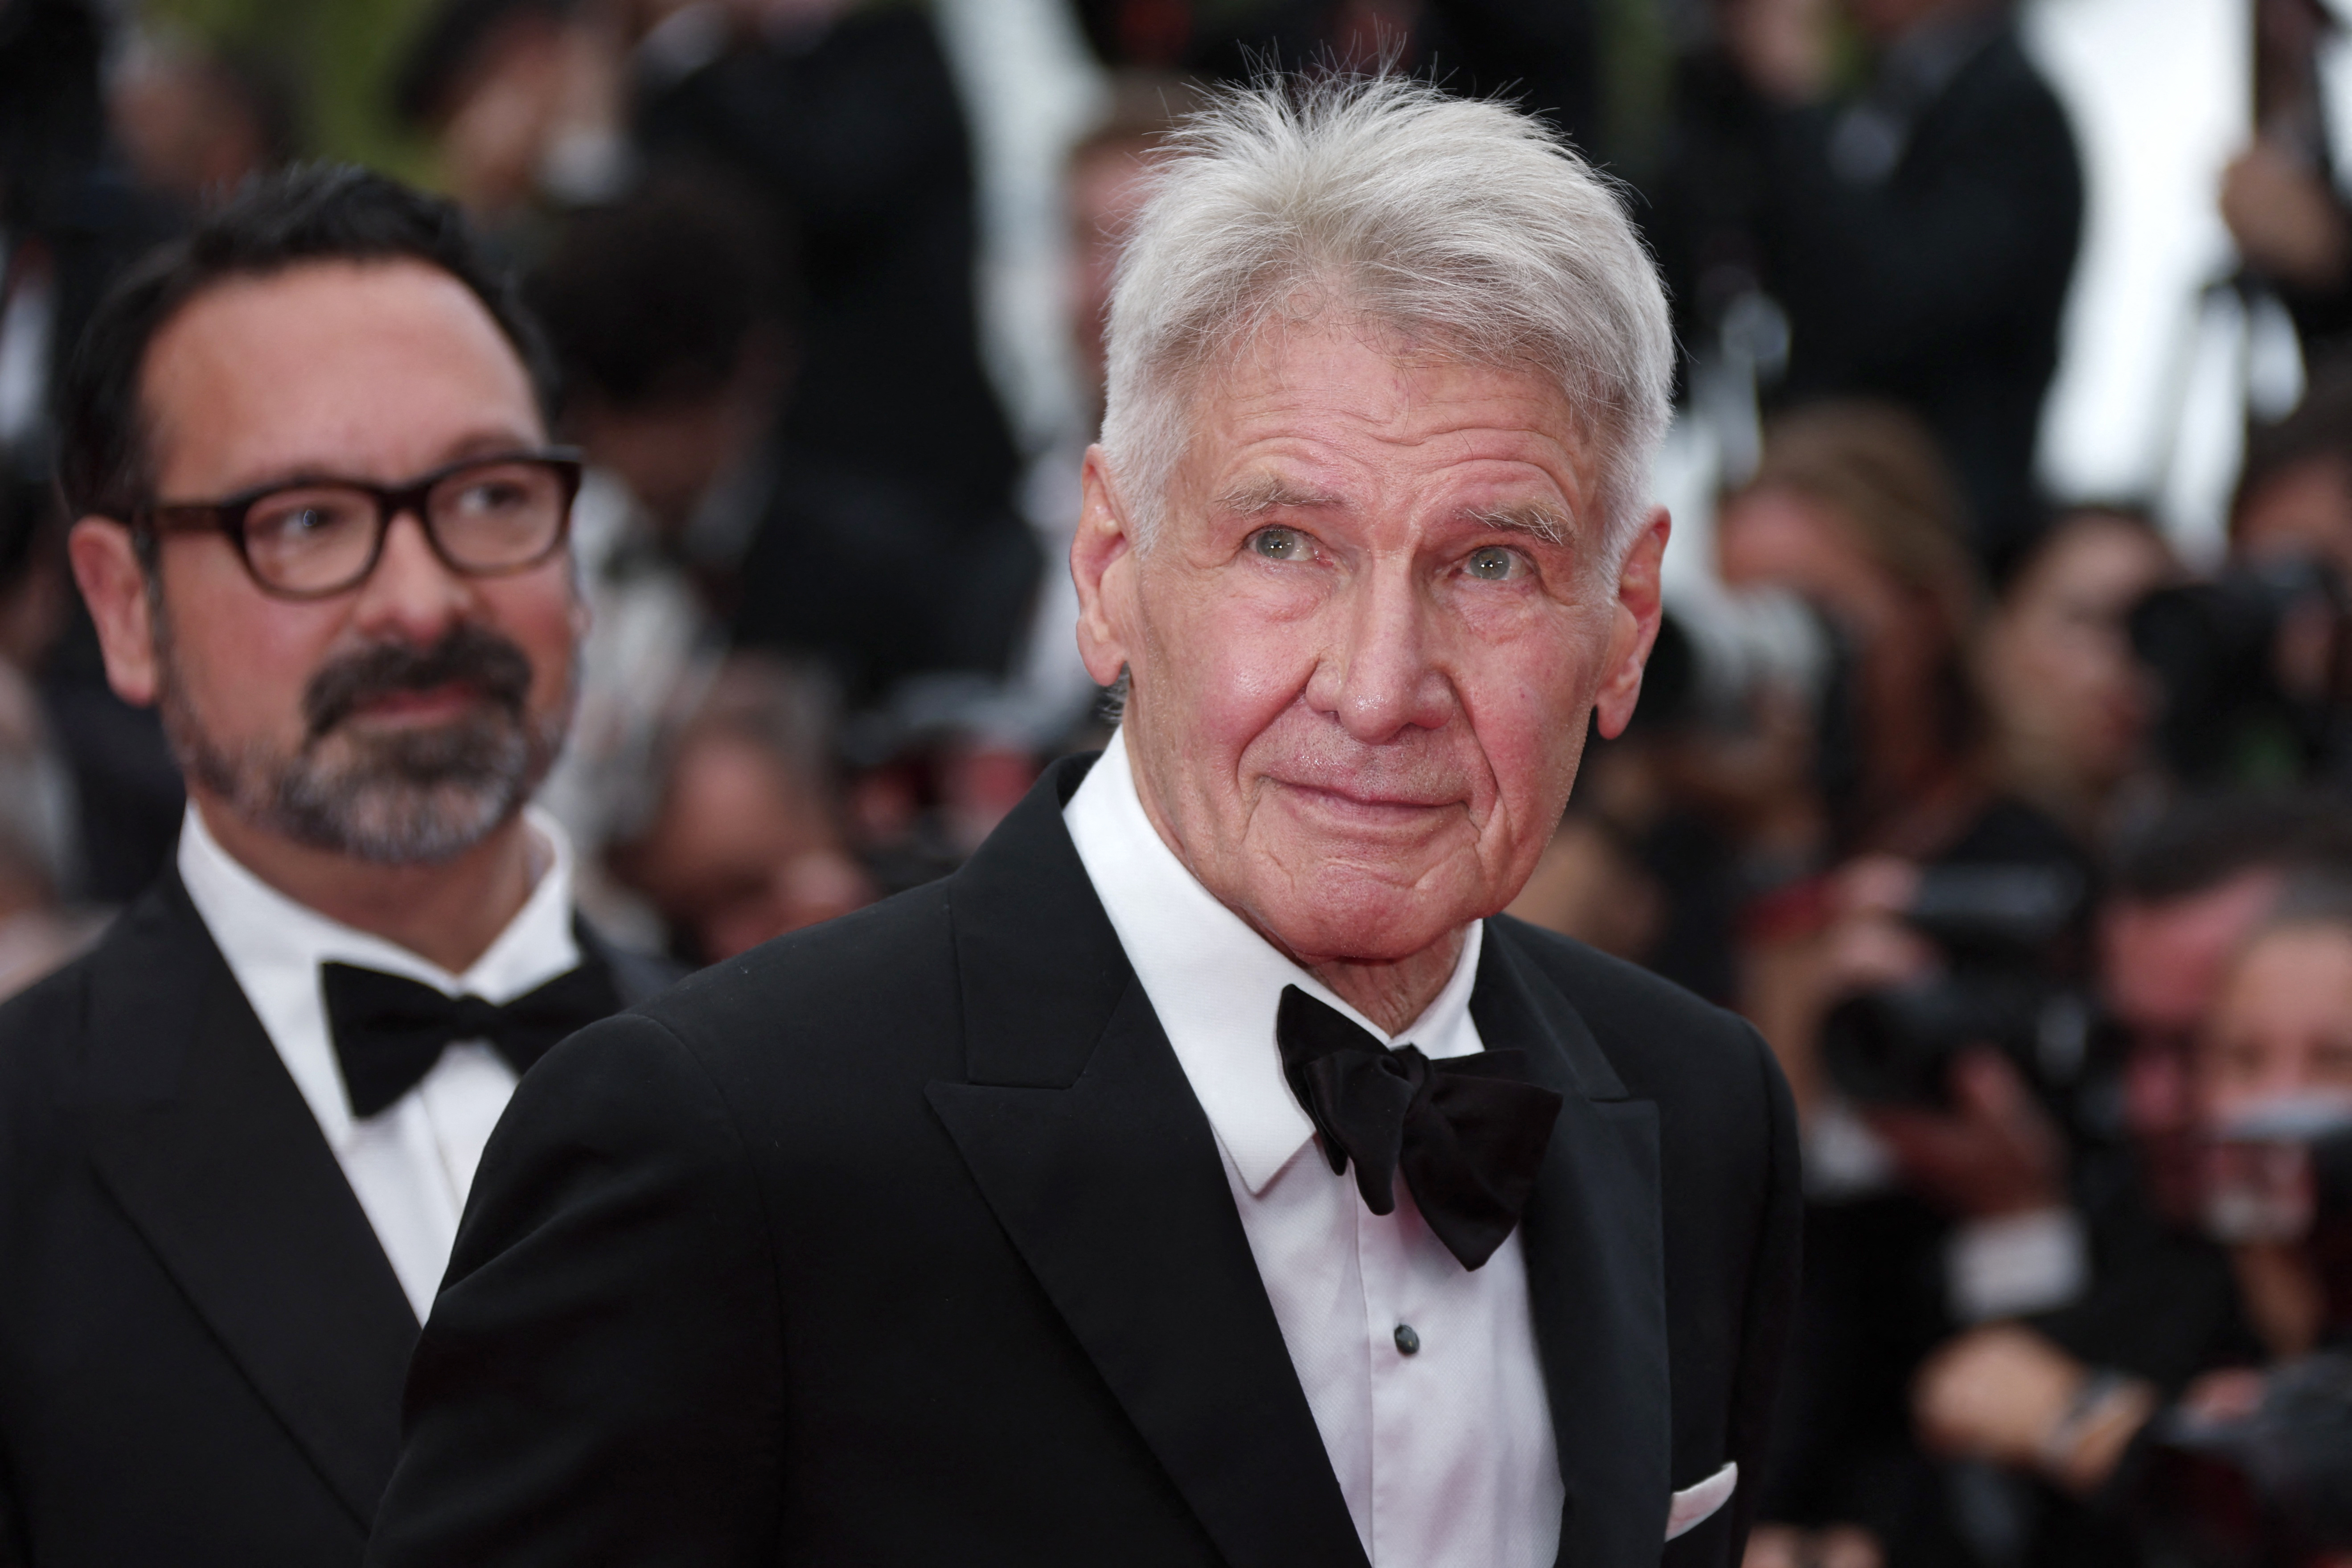 Harrison Ford announces retirement of 'Indiana Jones' character at Cannes